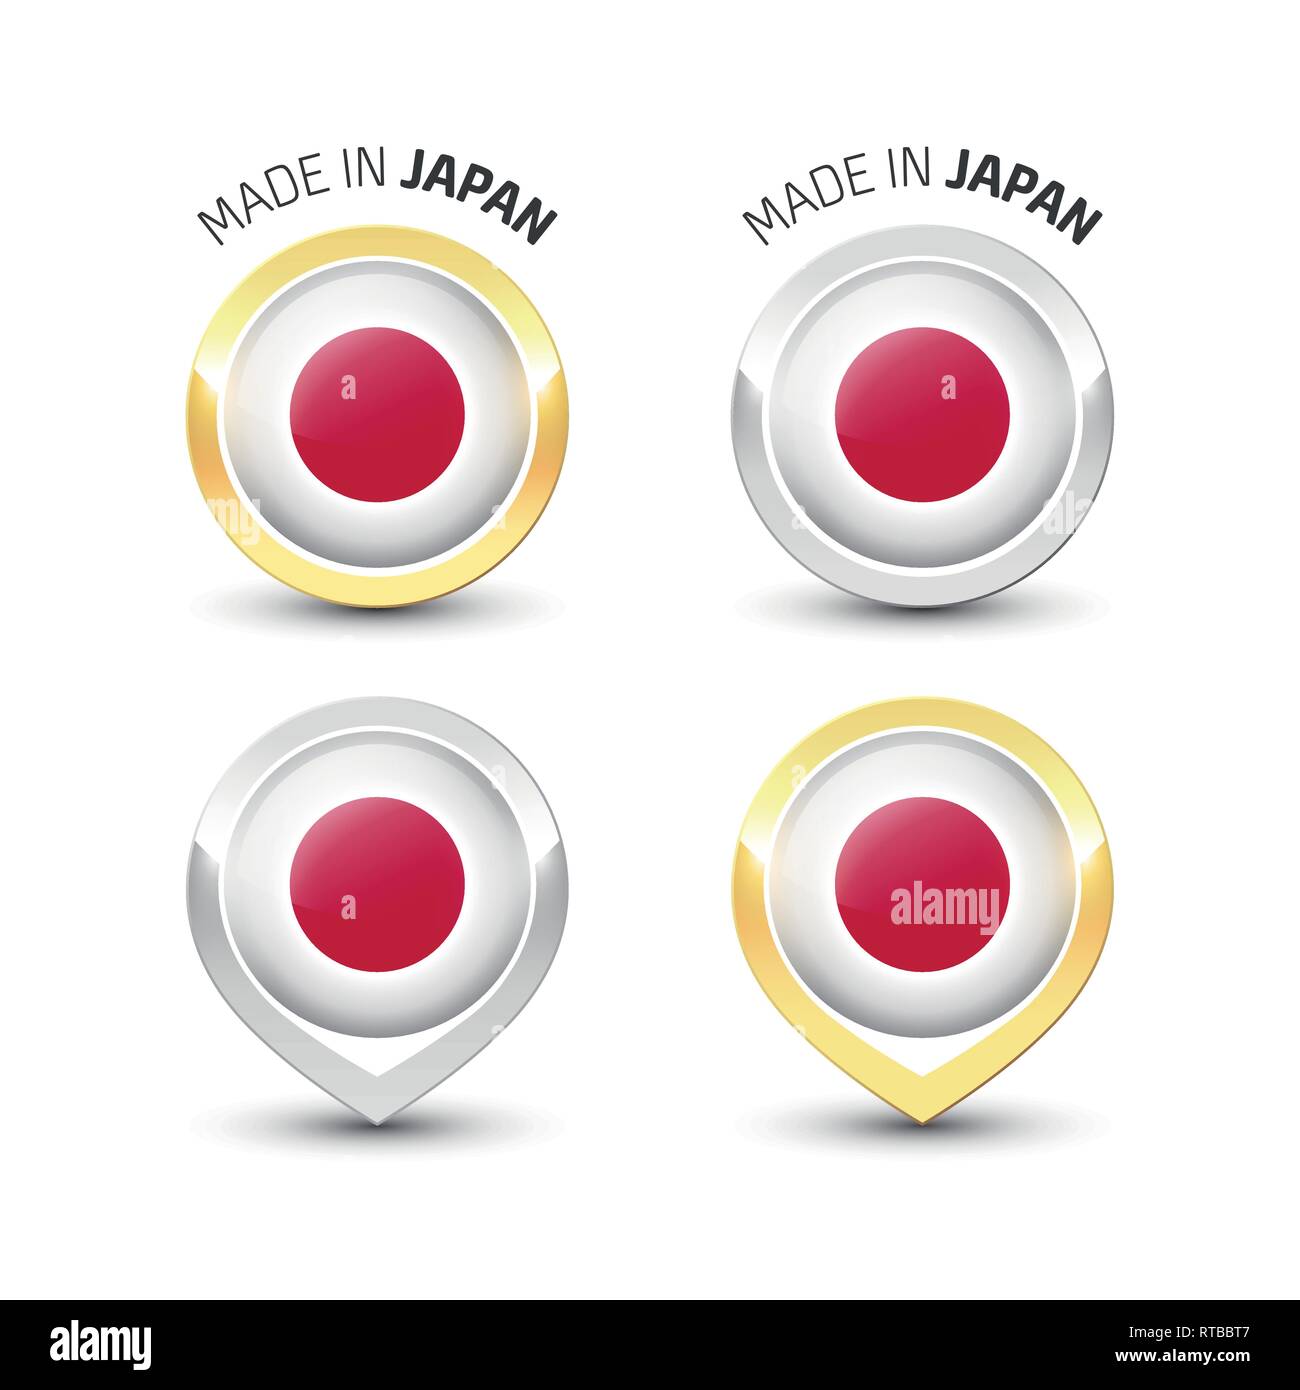 Made in Japan - Guarantee label with the Japanese flag inside round gold and silver icons. Stock Vector